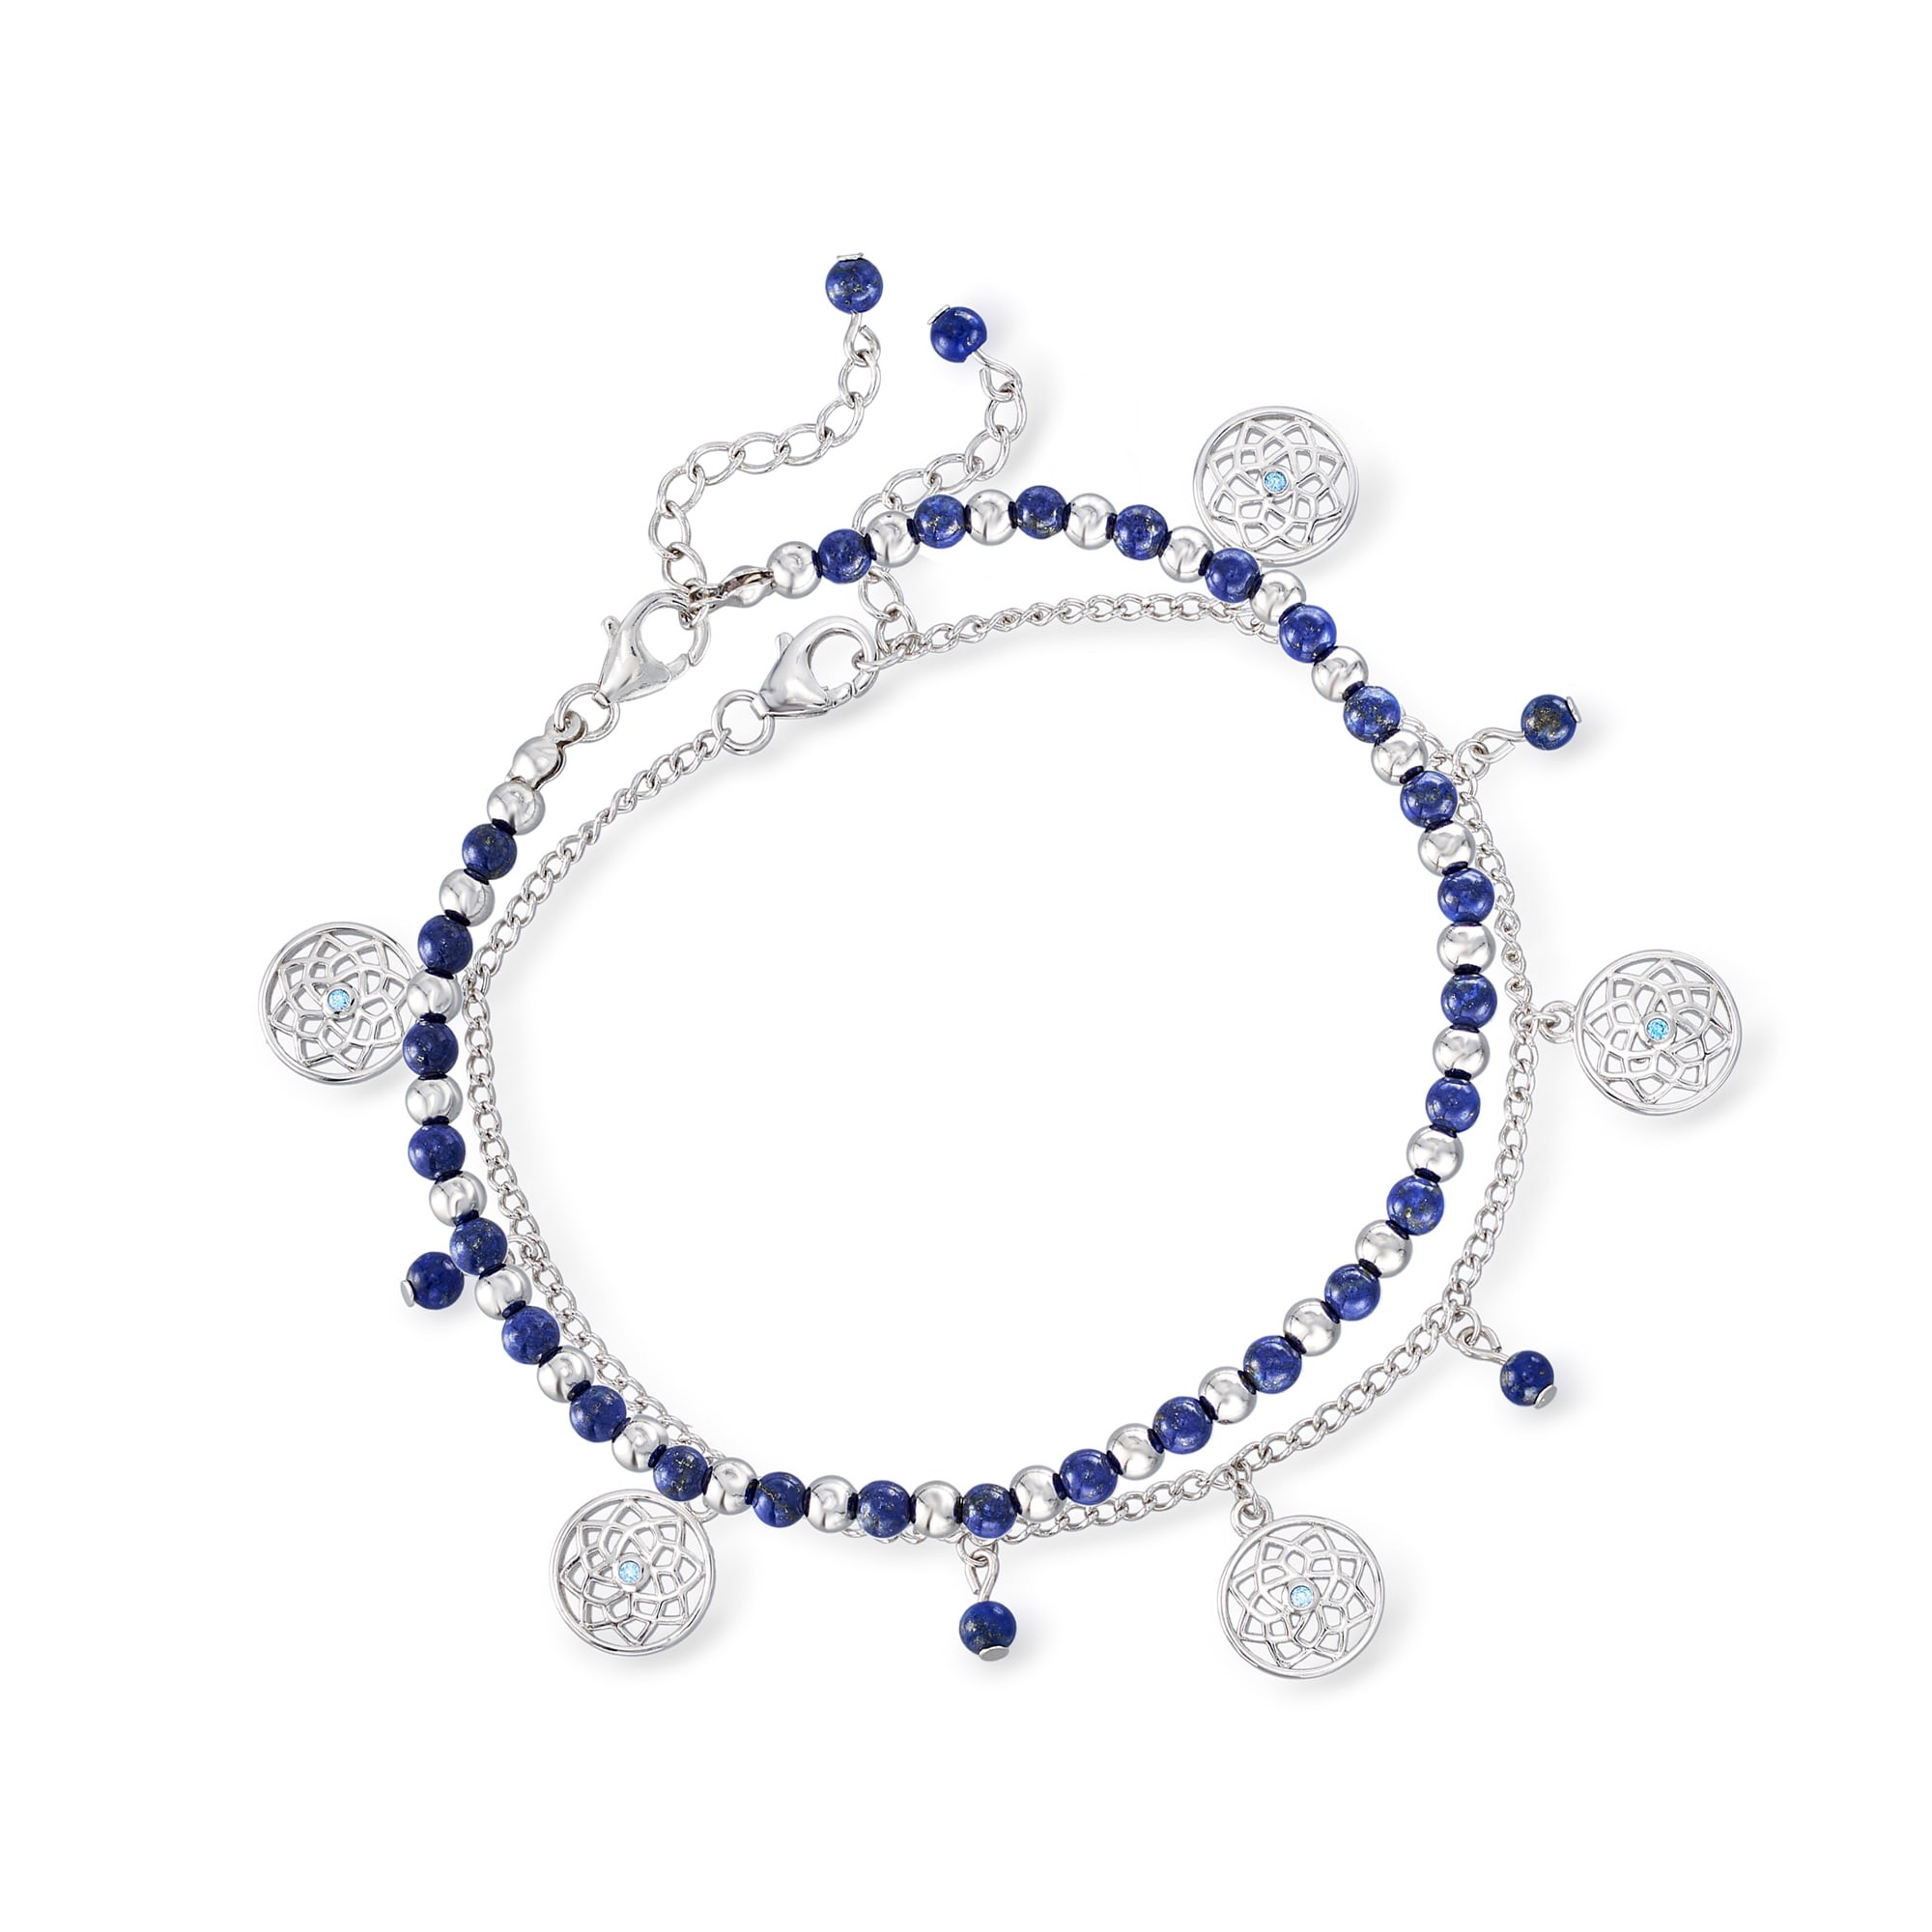 Lapis Bead Jewelry Set: Two Charm Anklets in Sterling Silver. 9